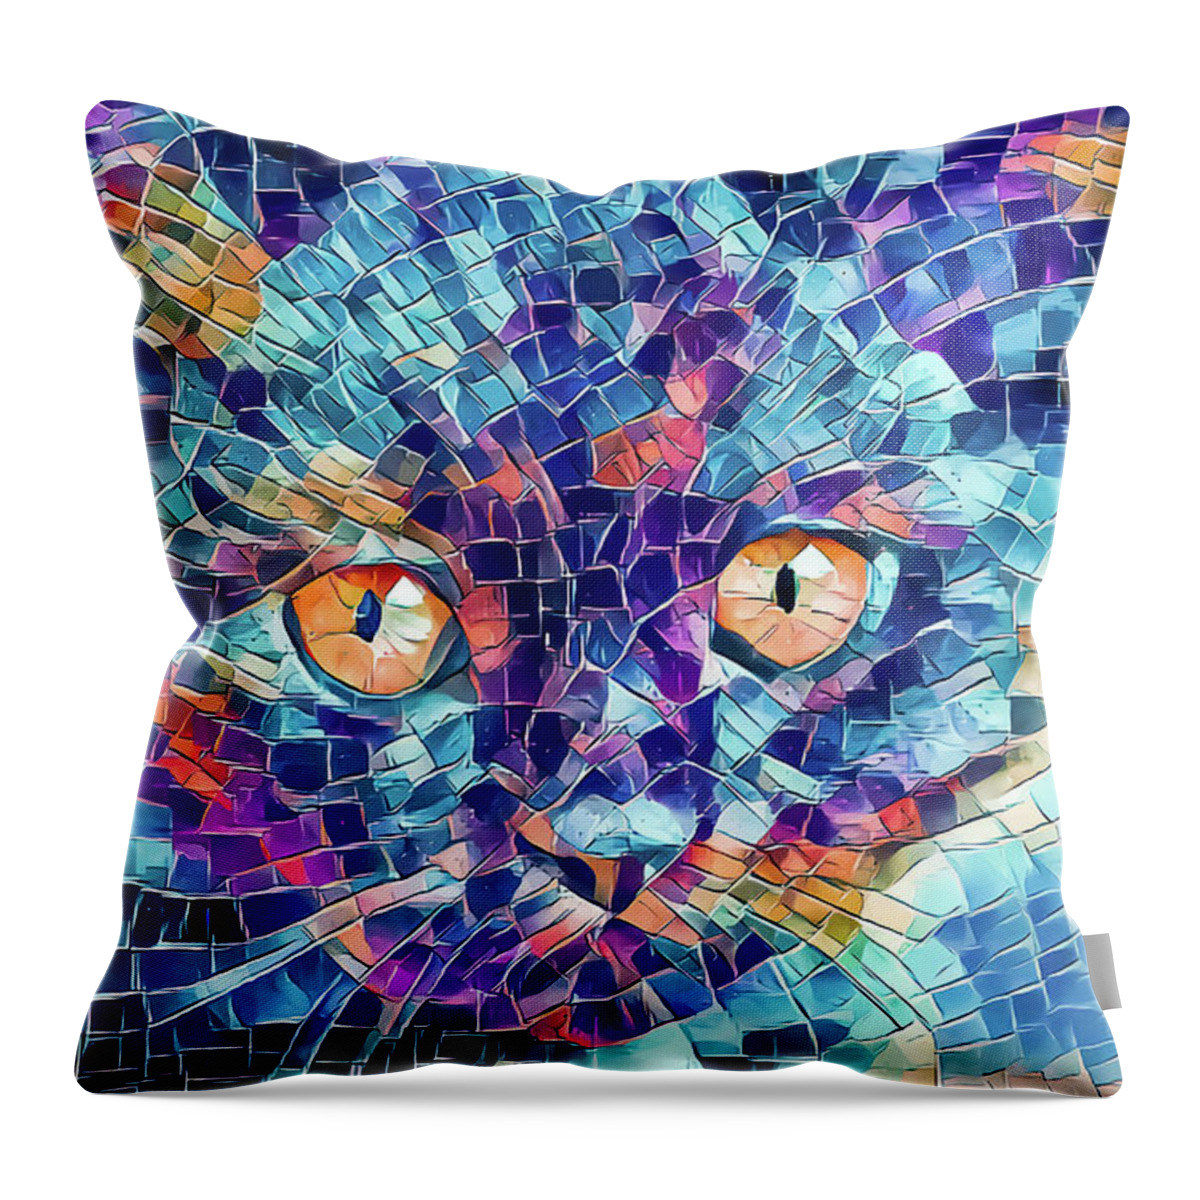 Kitten Throw Pillow featuring the digital art Giant Head Mosaic Colorful by Don Northup